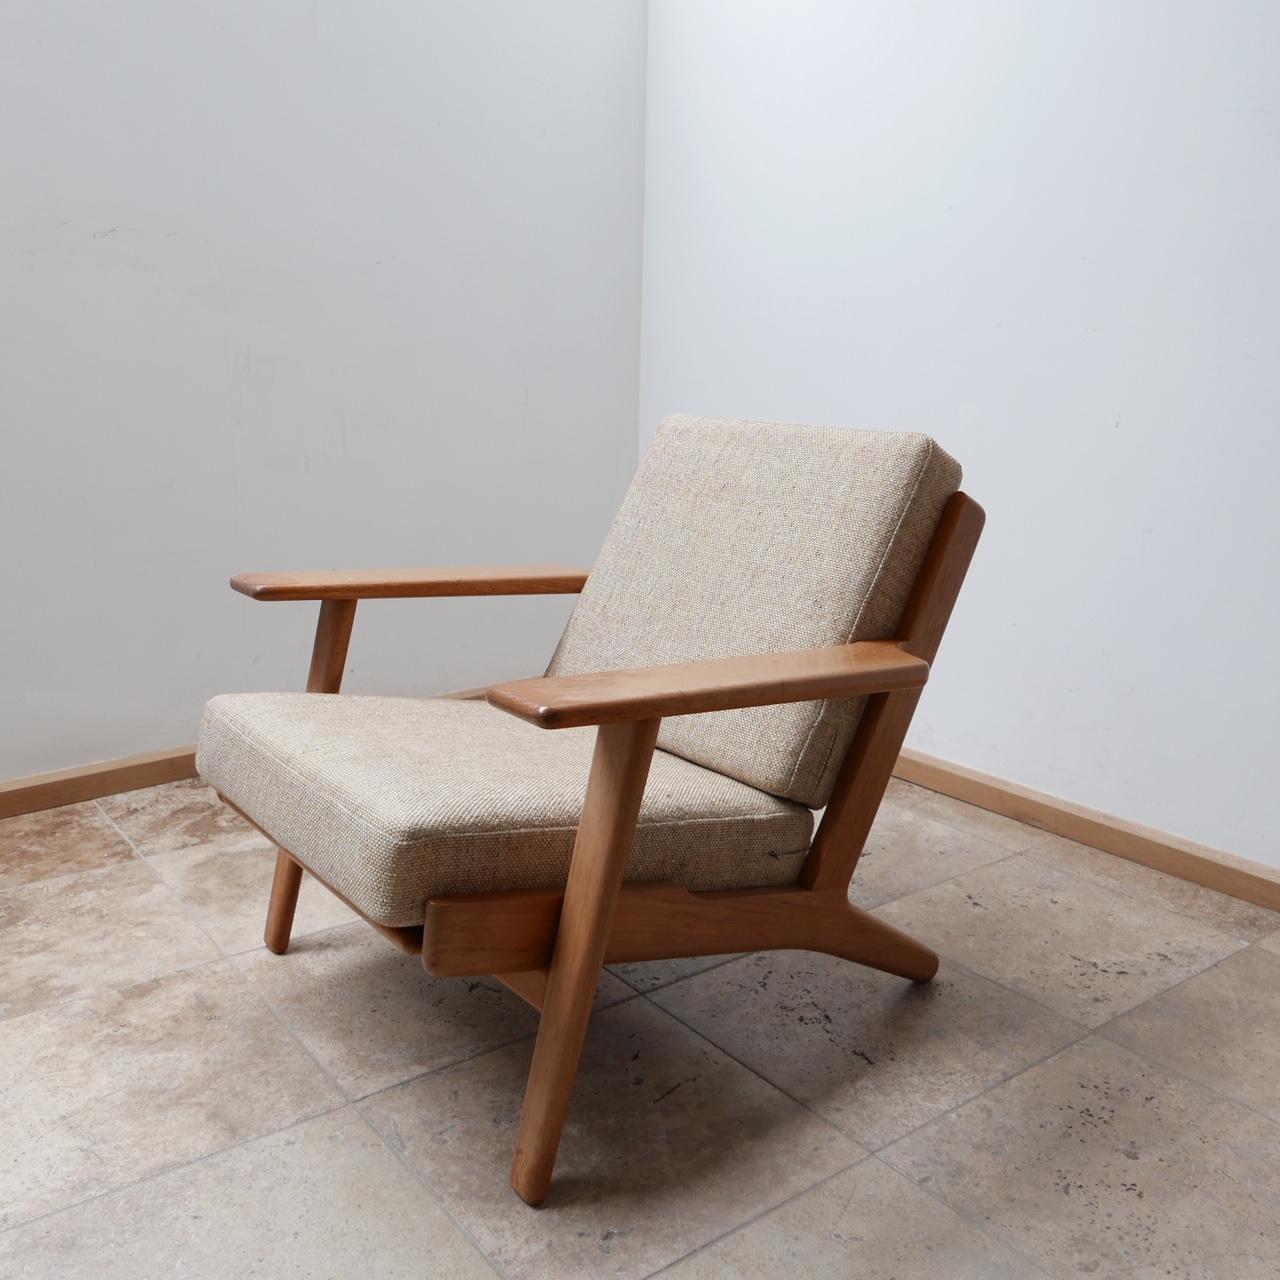 The much demanded GE 290 model armchair by design legend Hans J Wegner. 

Denmark, c1960s. 

Stamped Getama to underside, original cushions and chainlink straps retained. Cushions are in good condition. 

Some wear to the wood finish which